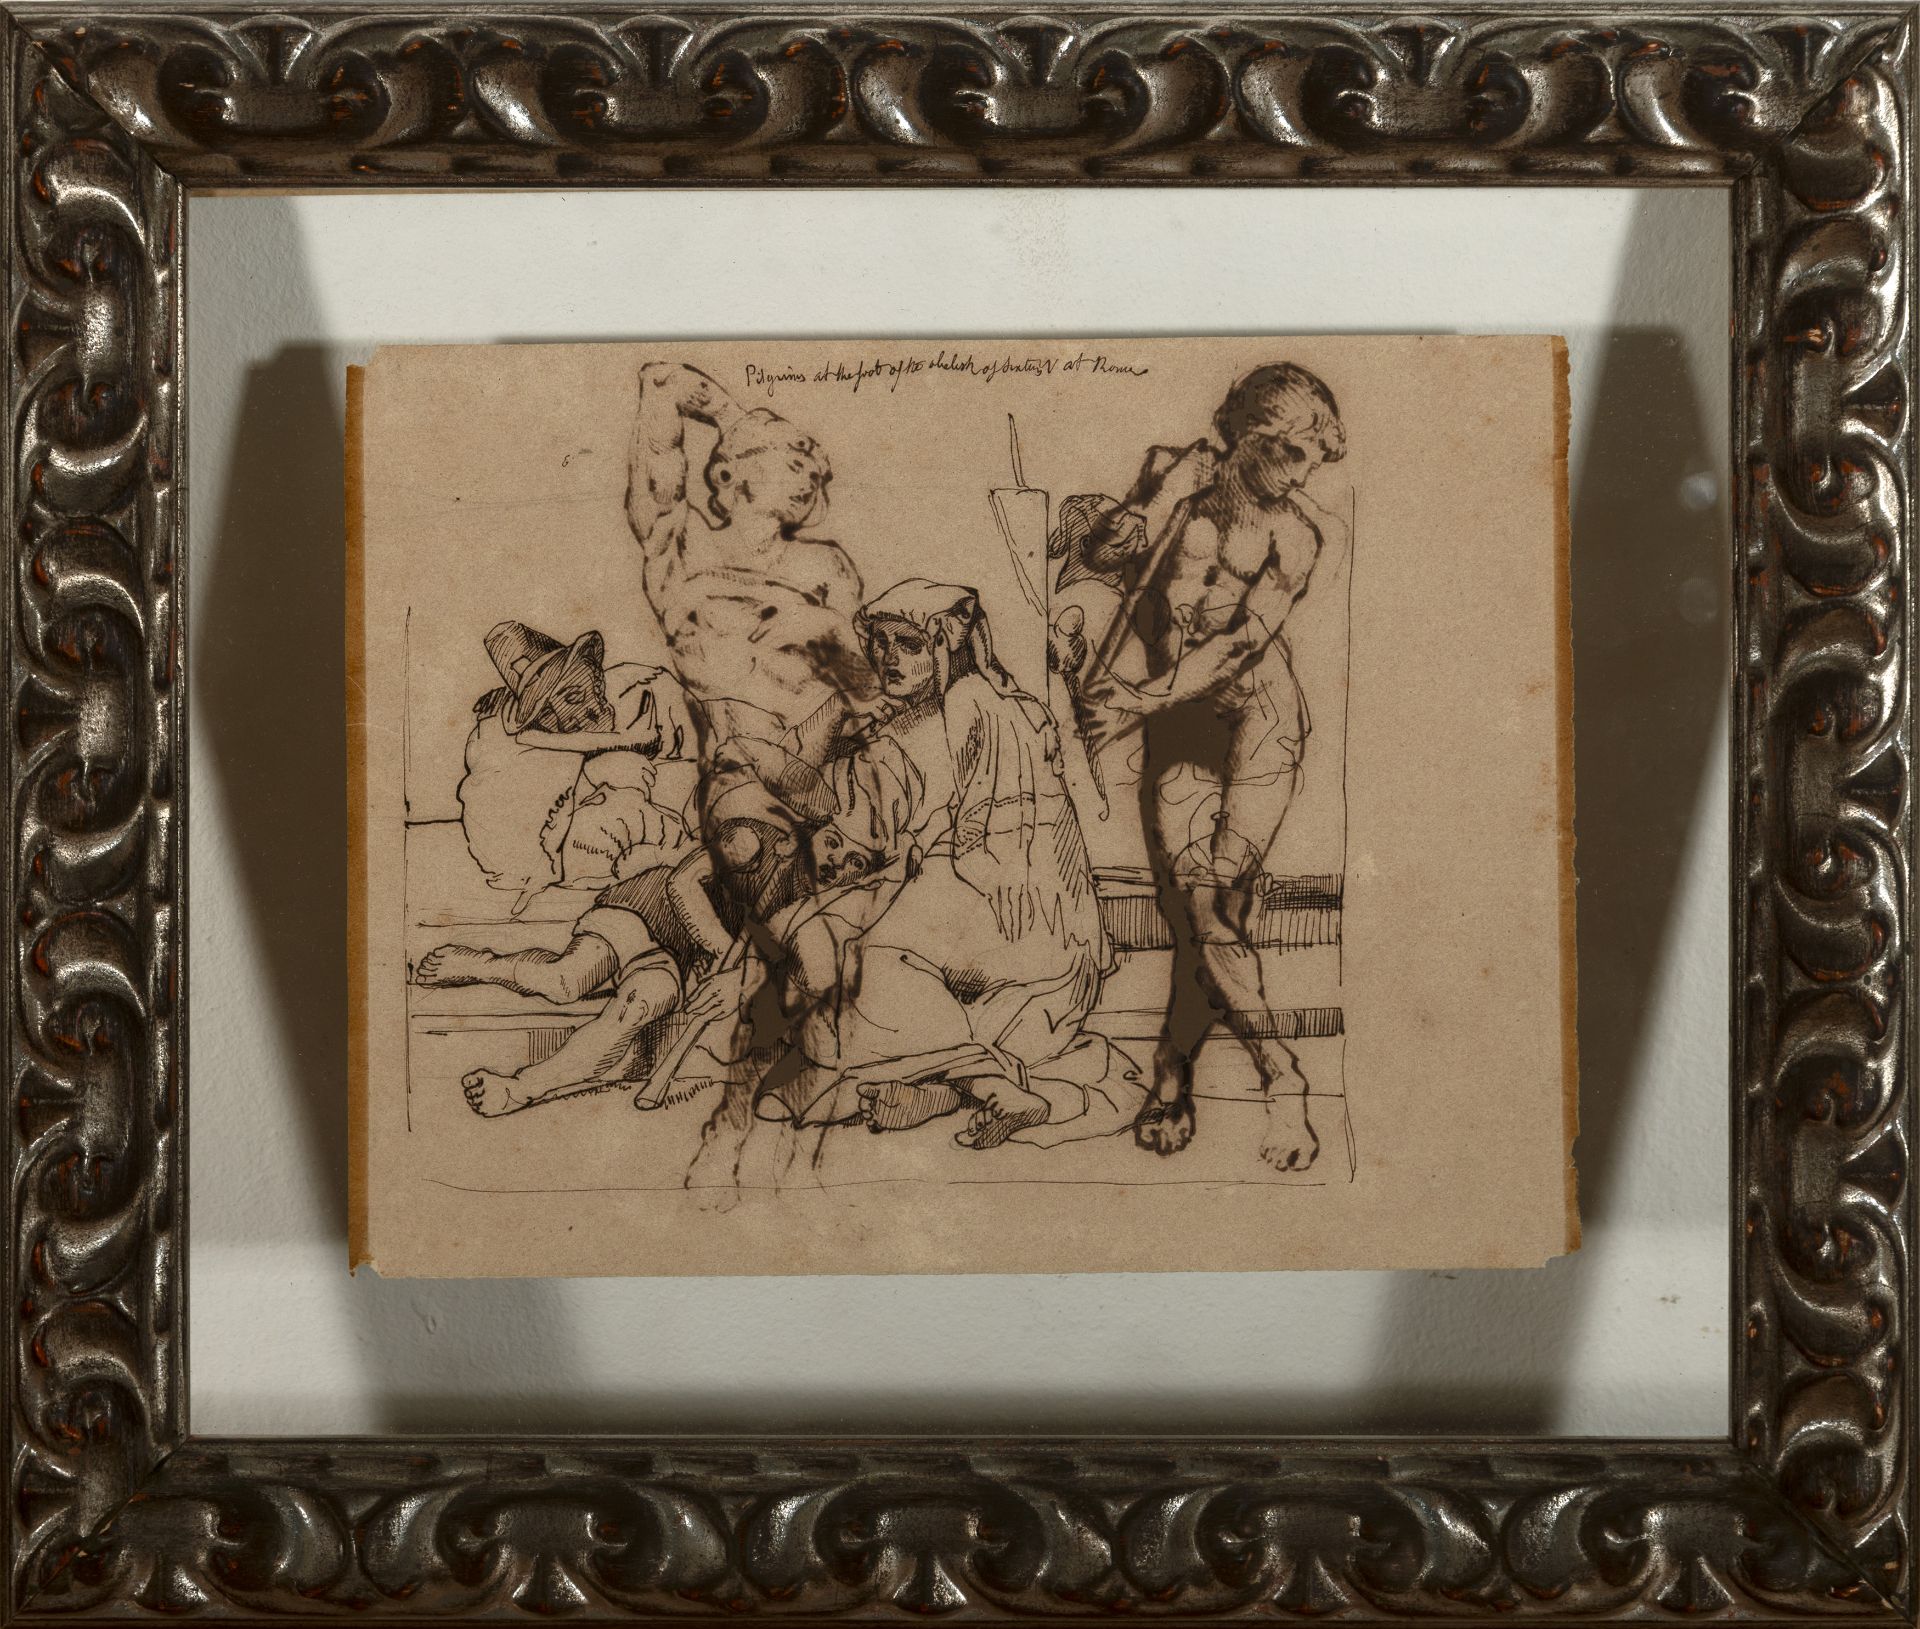 Decorative Pair of Italian Studies in ink on paper following models by Da Vinci from the 17th centur